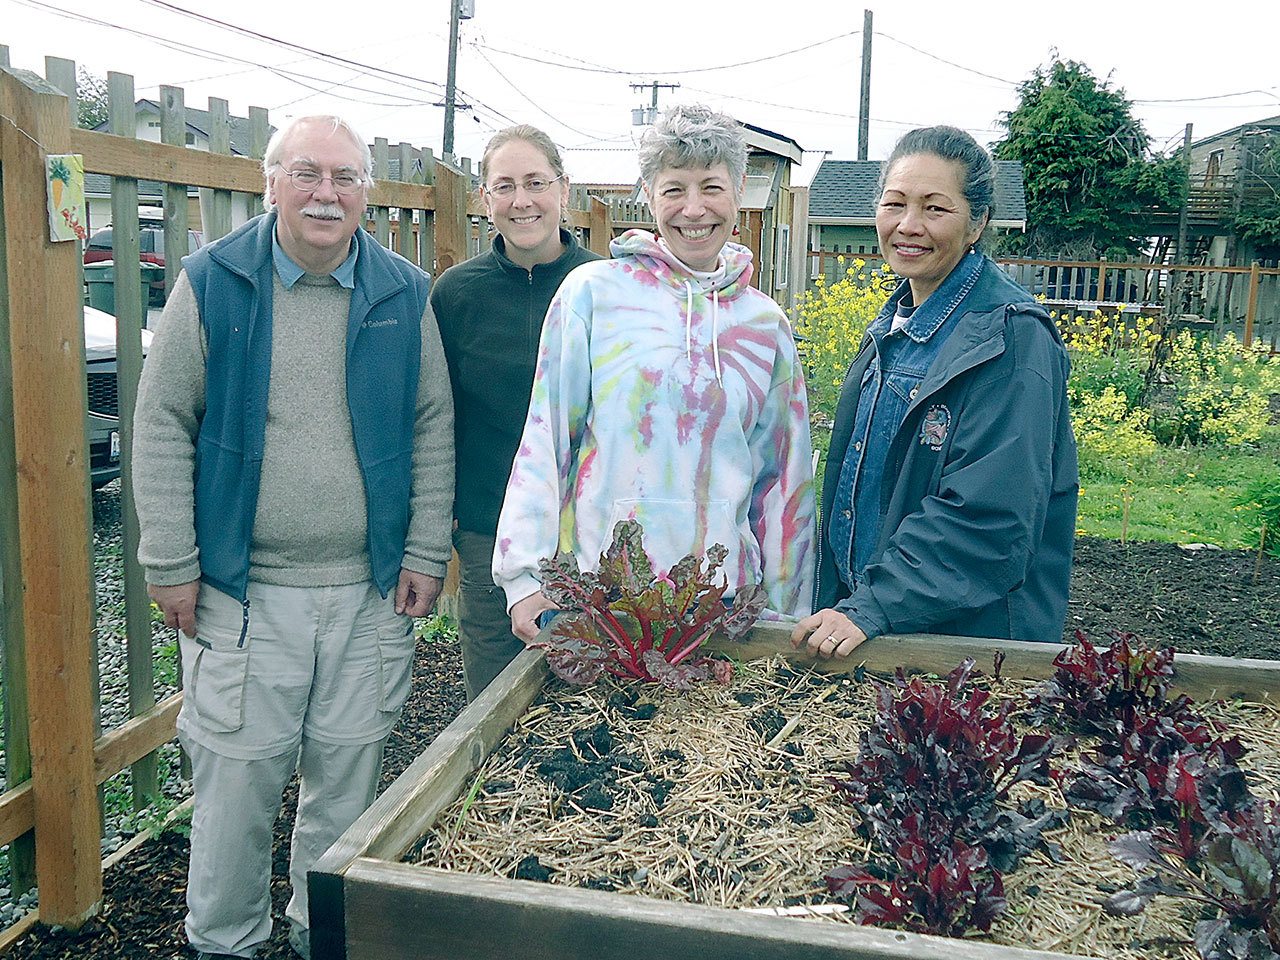 Veteran Master Gardeners, from left, Bob Cain, Laurel Moulton, Jeanette Stehr-Green and Audreen Williams will lead a one-hour walk through the Fifth Street Community Garden, 328 East Fifth St., Port Angeles, at noon today.